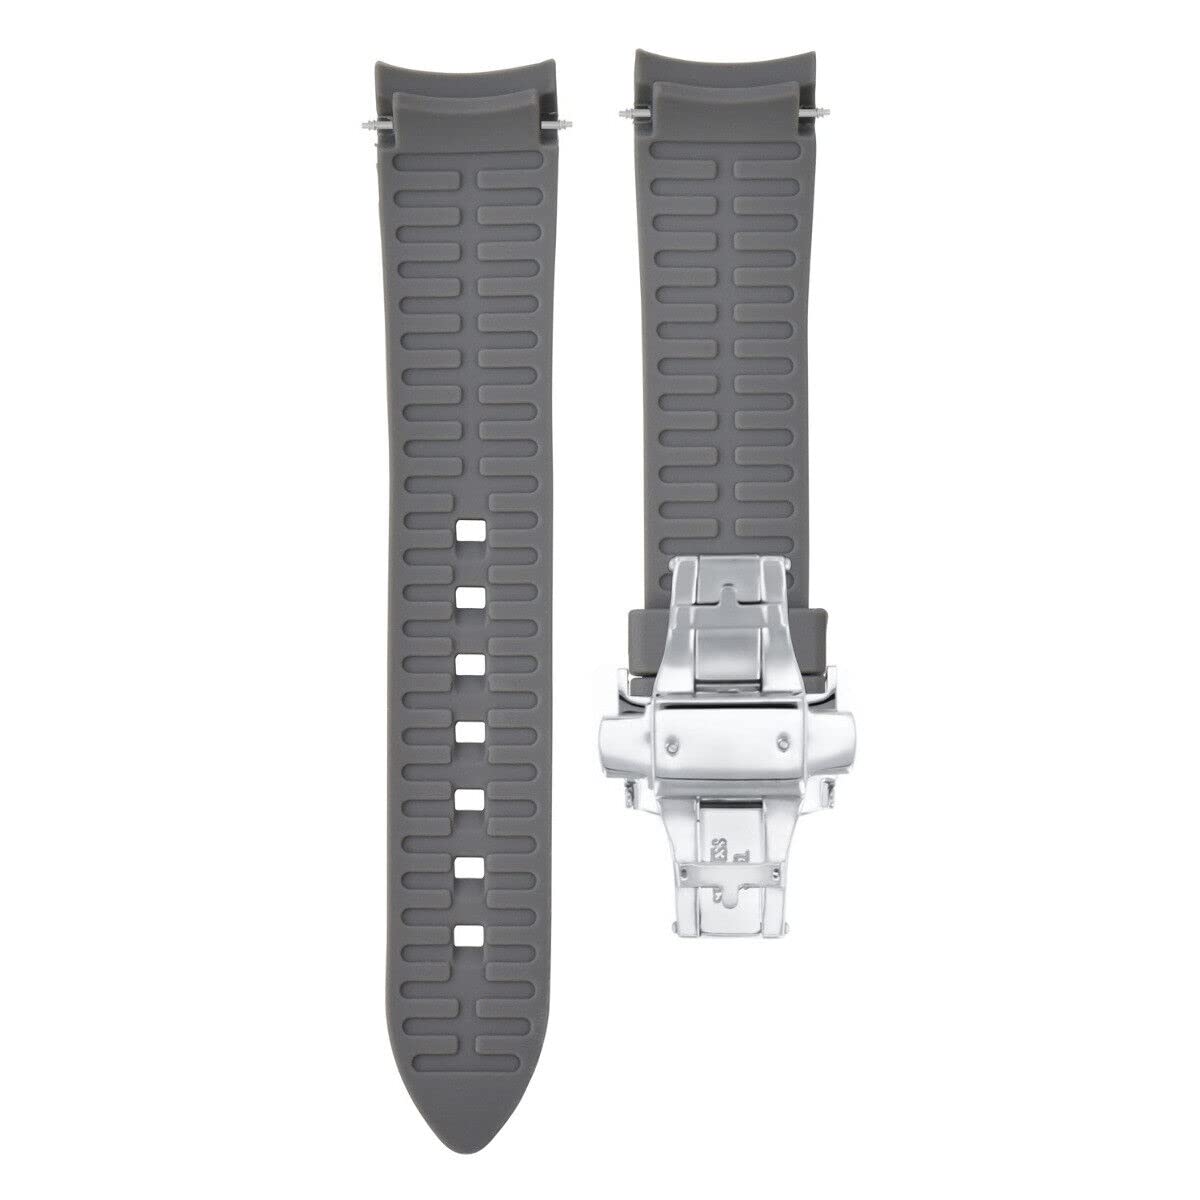 Ewatchparts CURVED END SILICONE WATCH BAND RUBBER STRAP 18MM 19MM,20MM 21MM 22MM 24MM +CLASP Black With Silver - 18mm